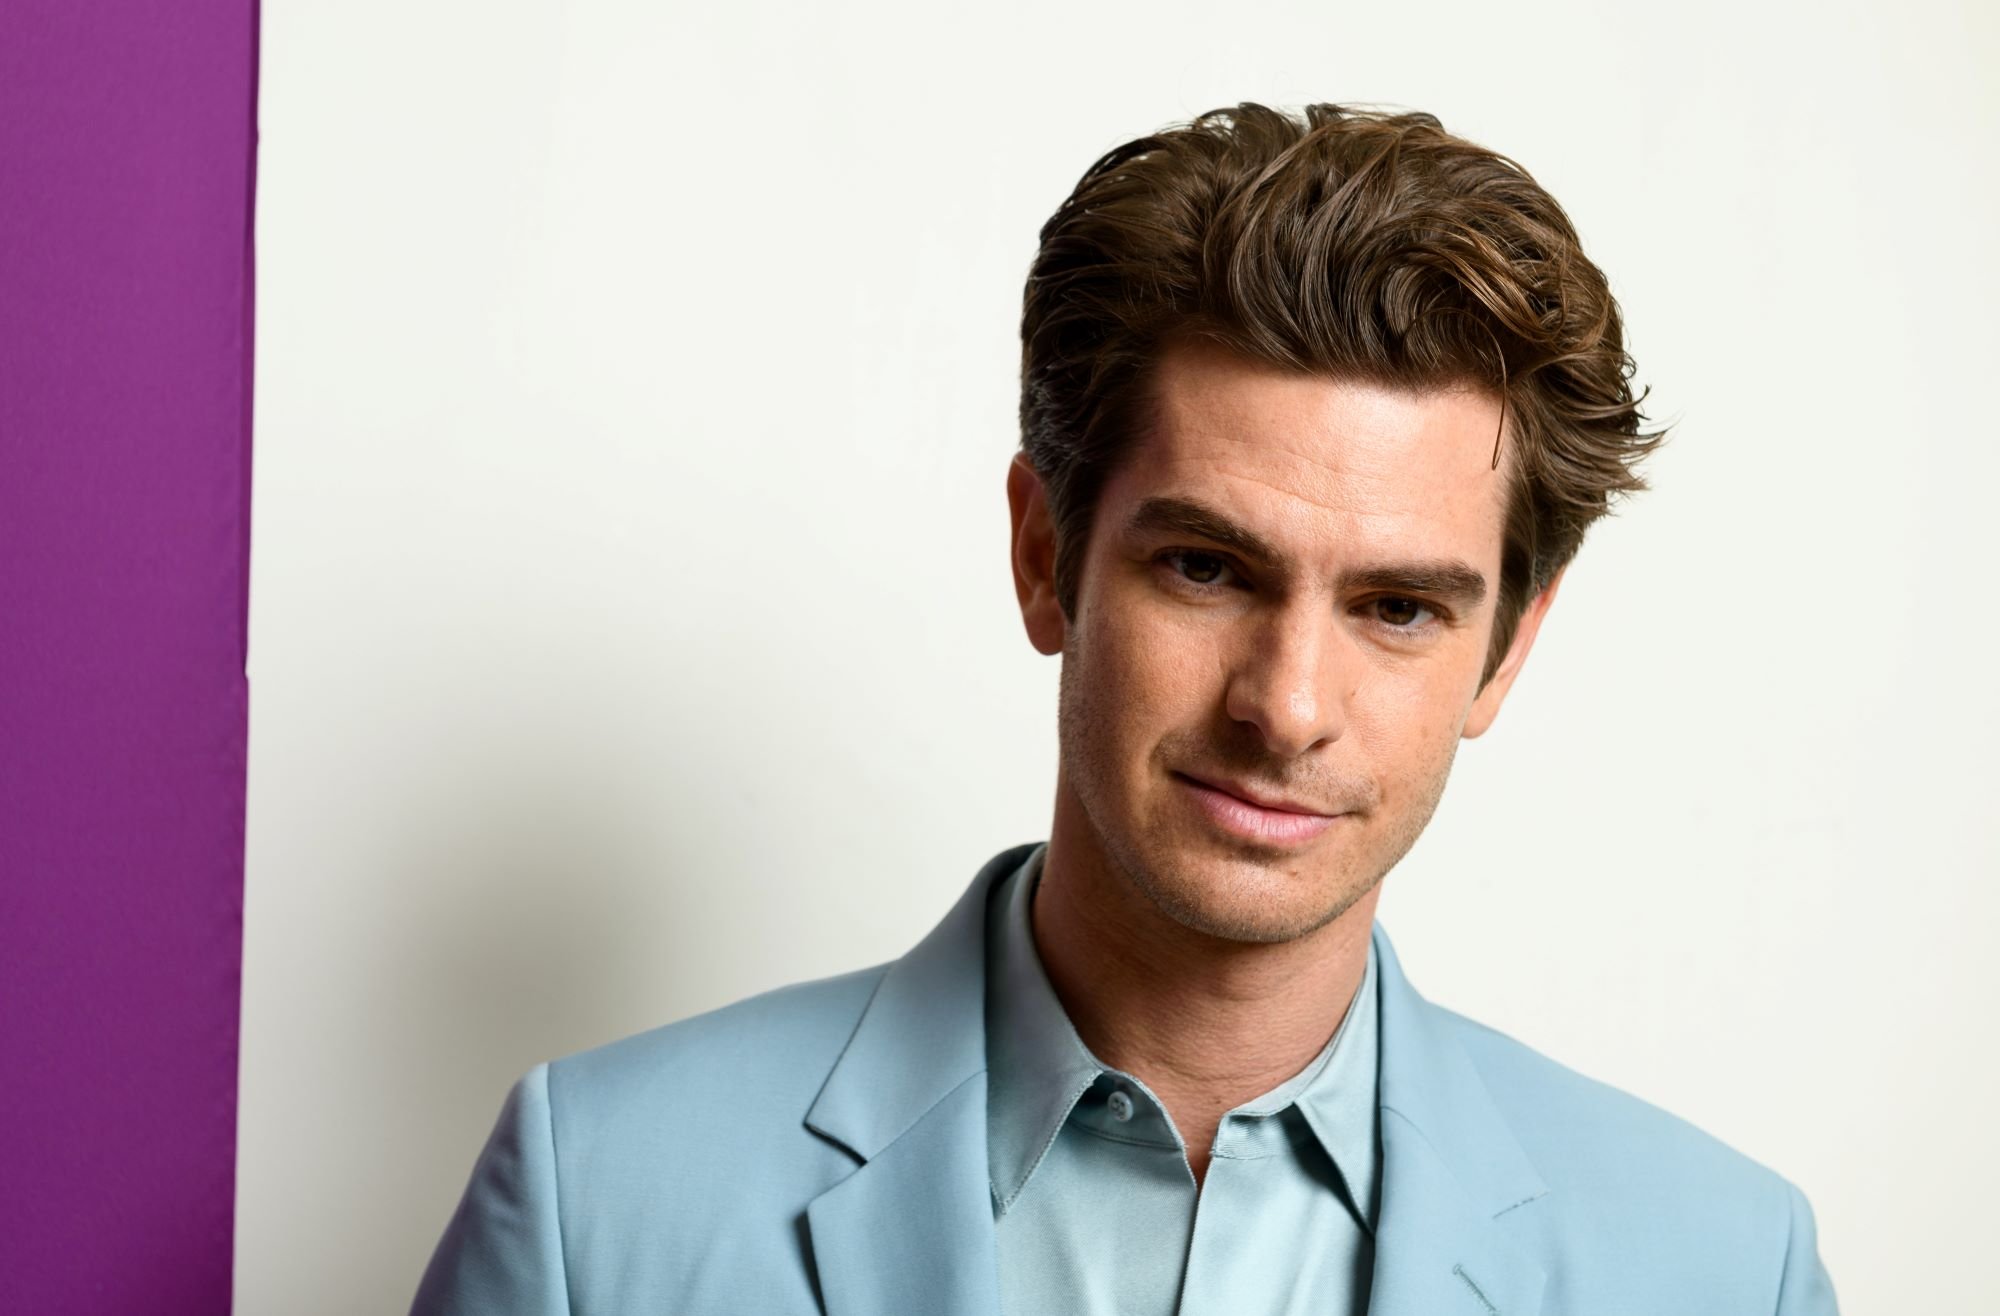 Andrew Garfield, a part of the 'Spider-Man: No Way Home' cast, wears a light blue suit over a light blue button-up shirt.